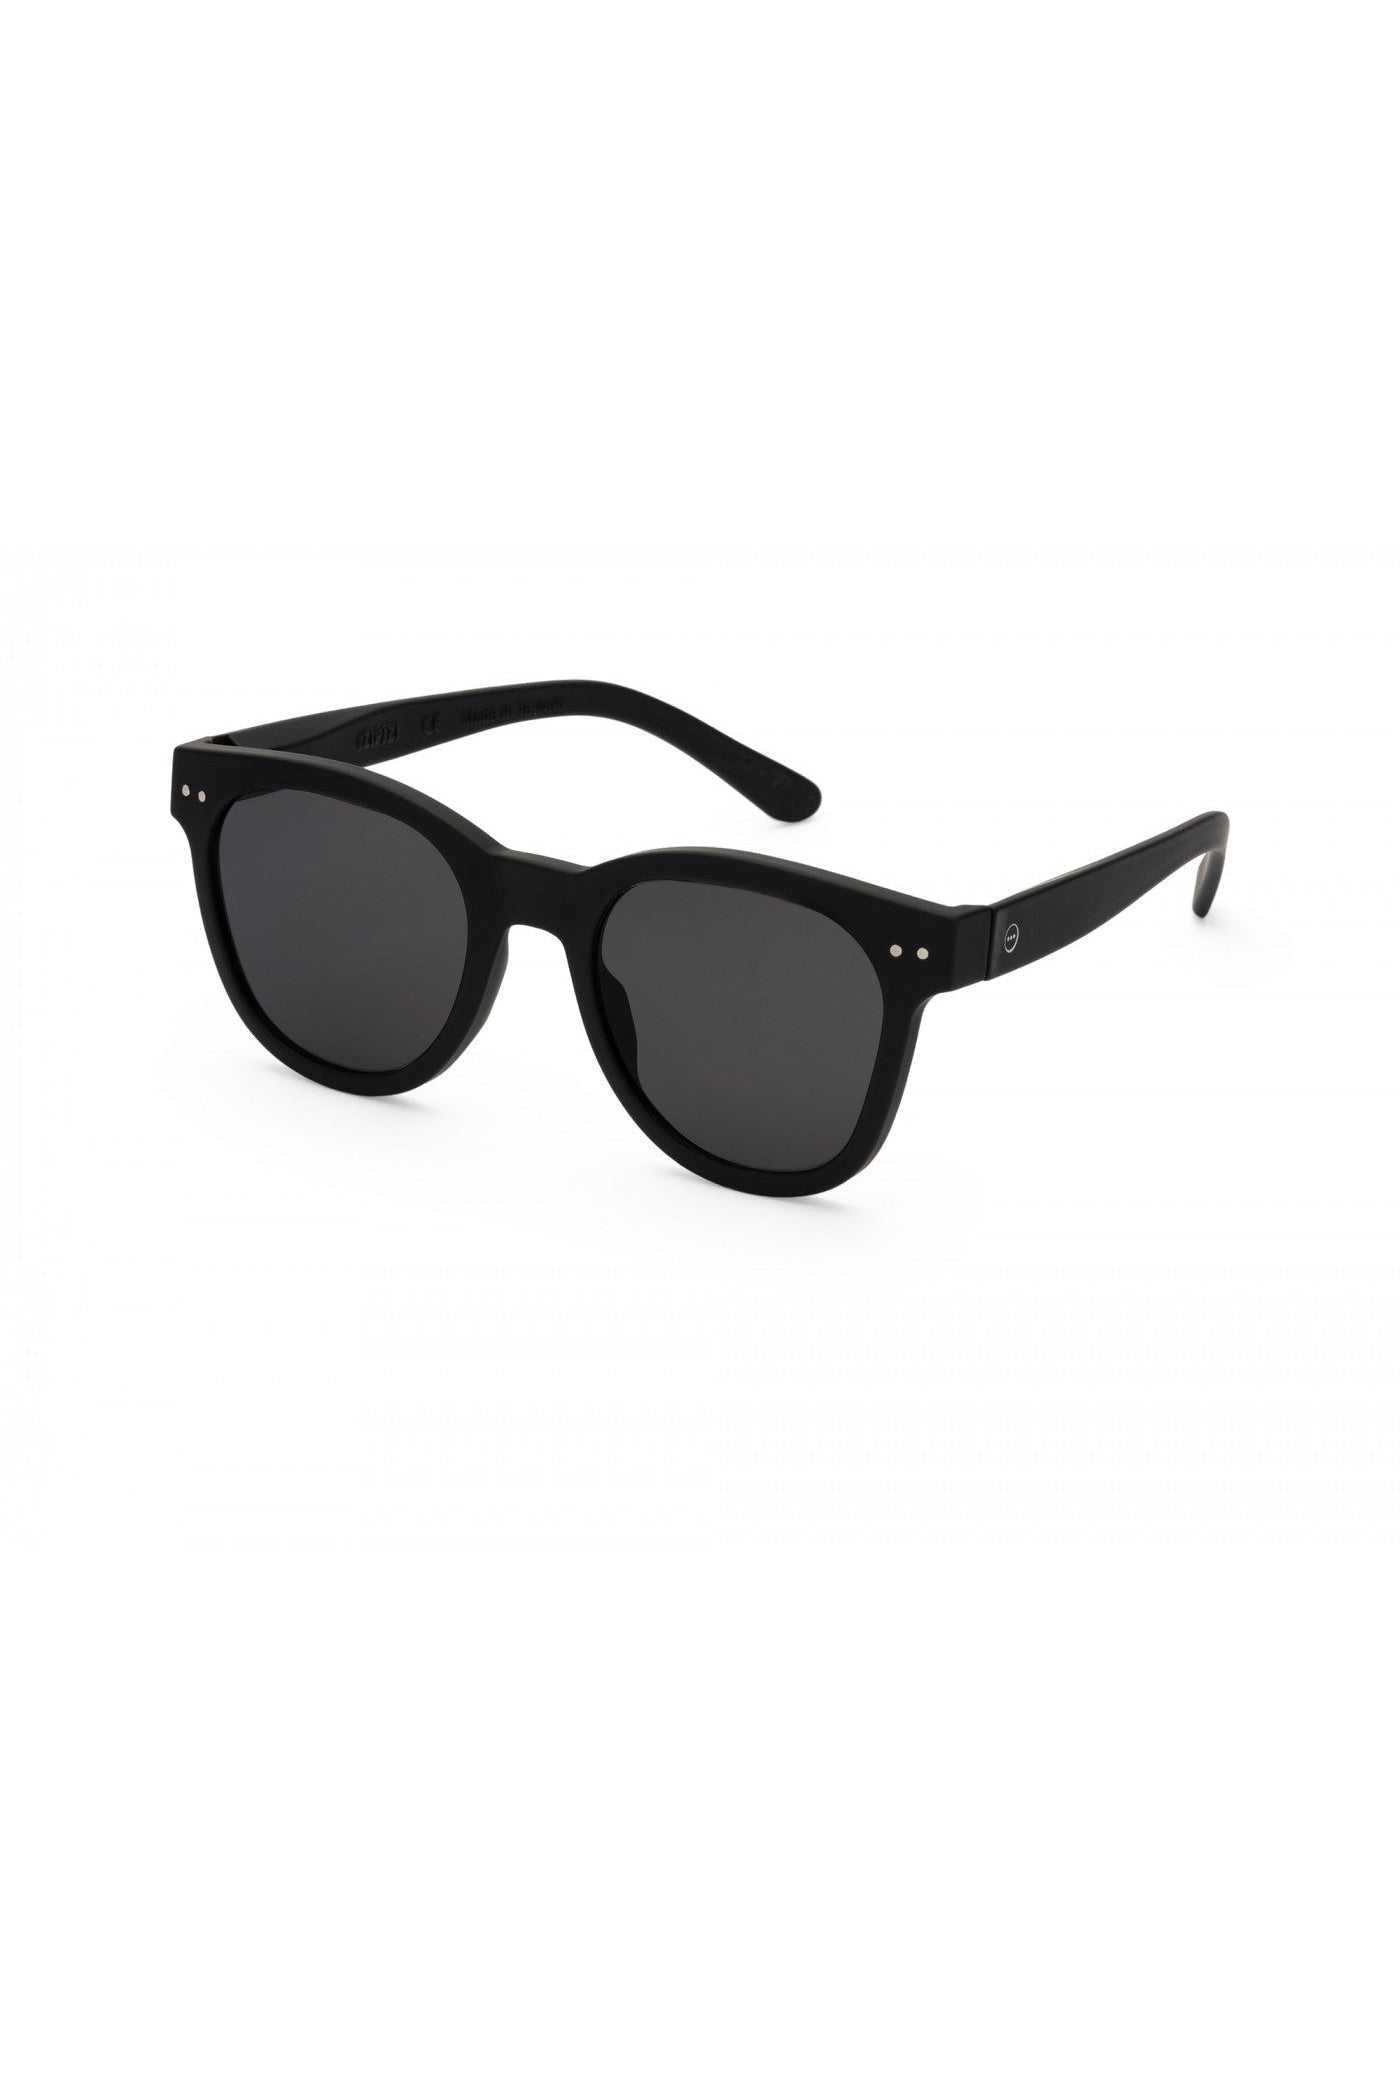 Izipizi #N Sunglasses in Black-Accessories-Ohh! By Gum - Shop Sustainable